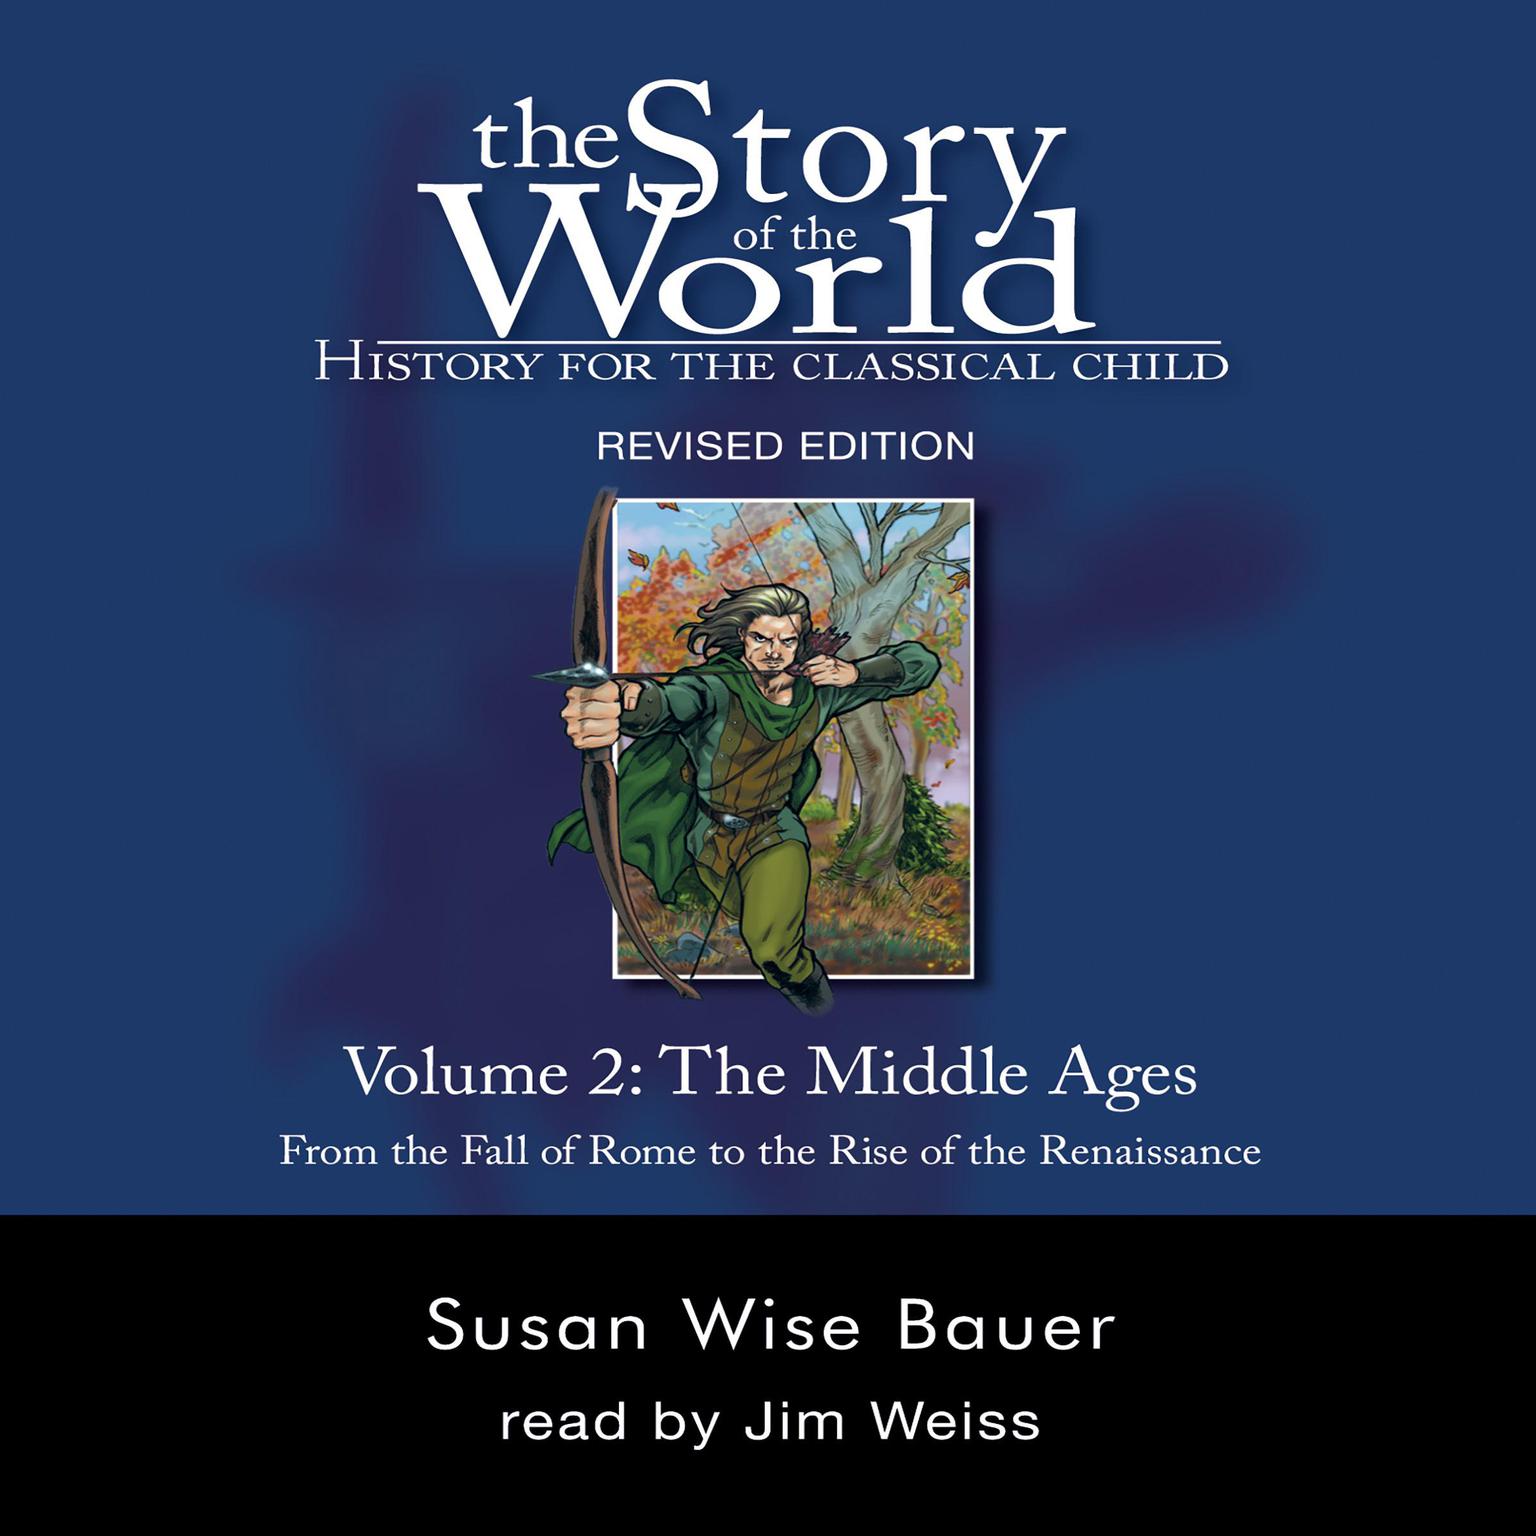 The Story of the World, Vol. 2 Audiobook Audiobook, by Susan Wise Bauer